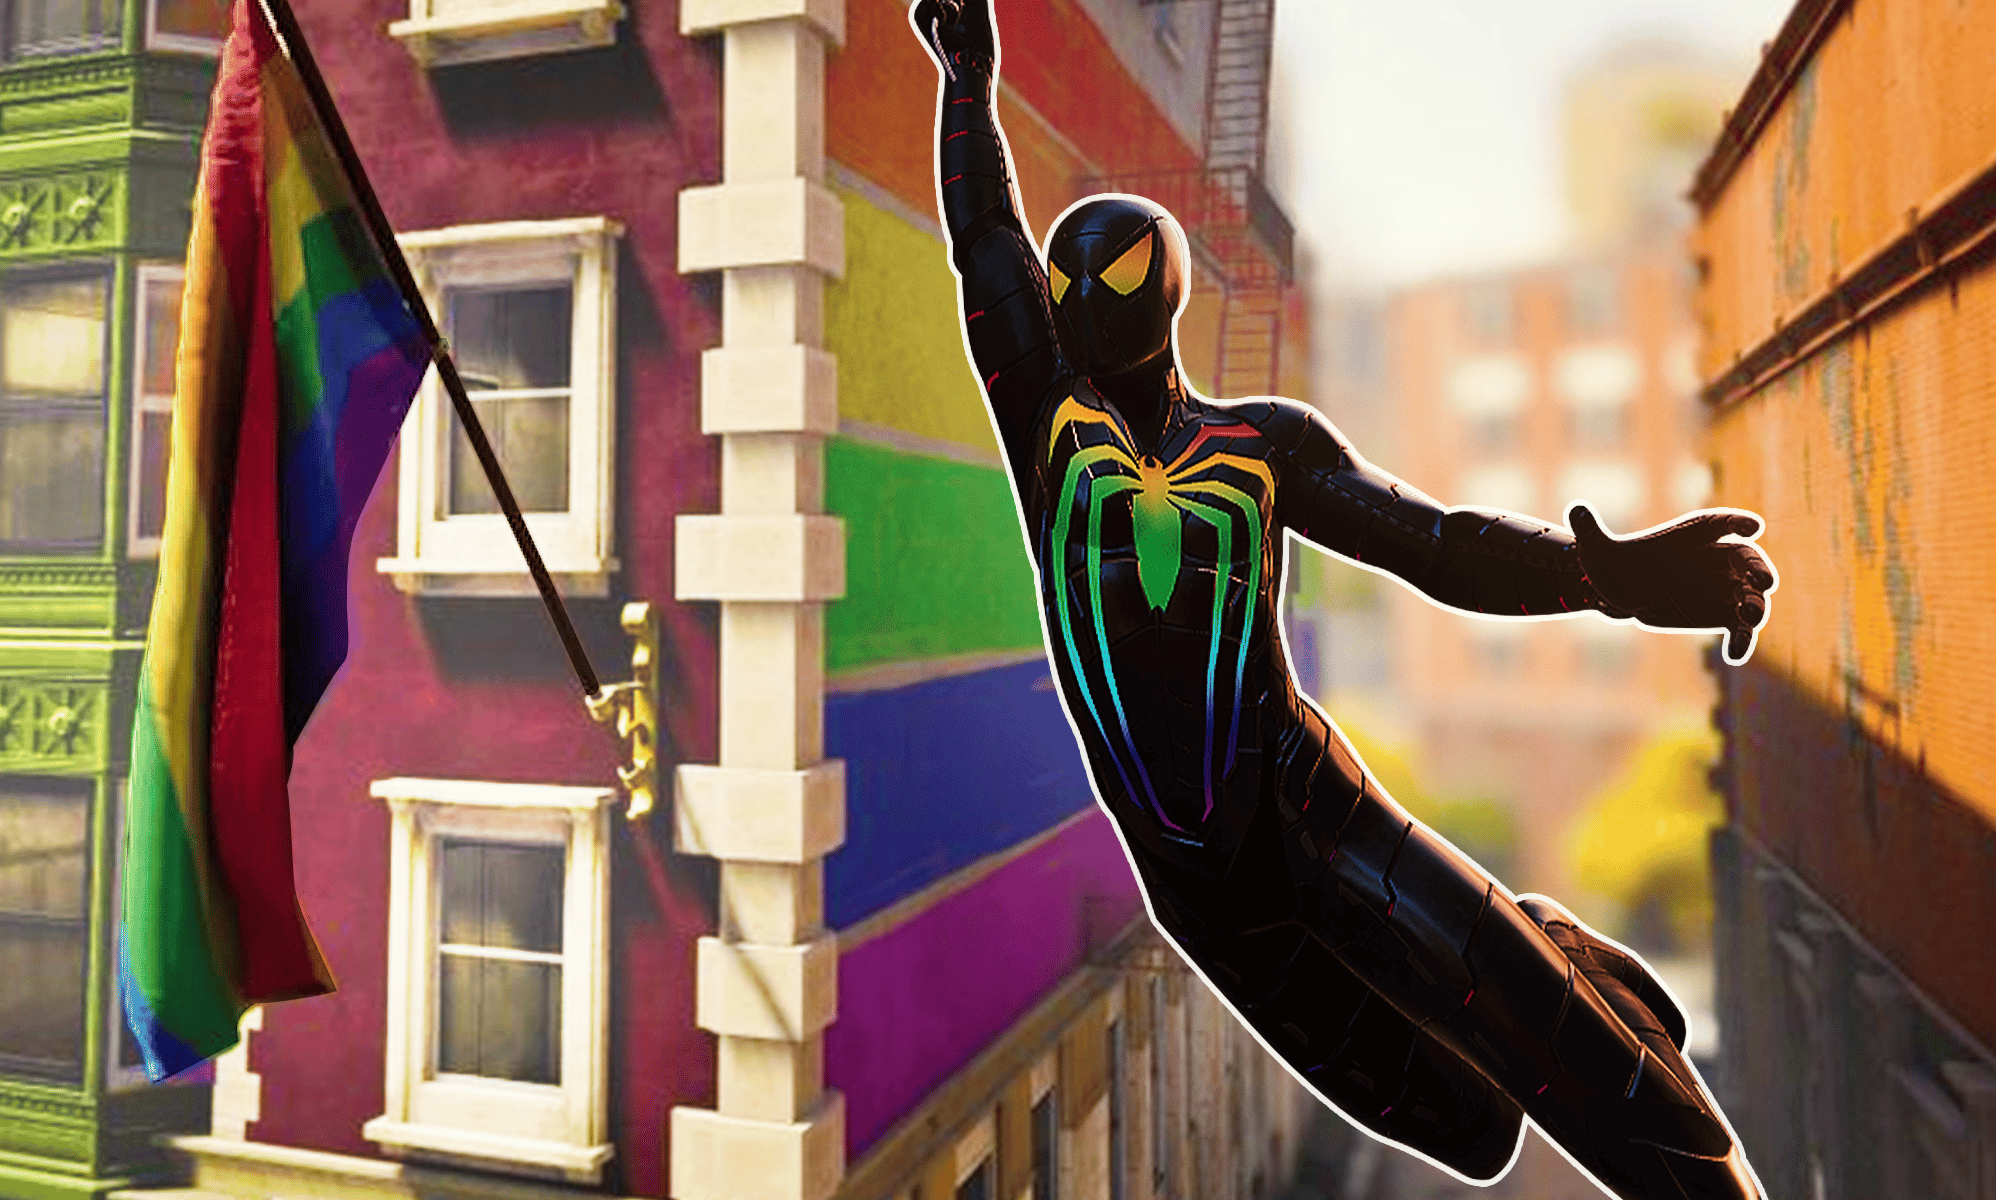 Nexus Mods bans 'Spider-Man Remastered' patch that replaced in